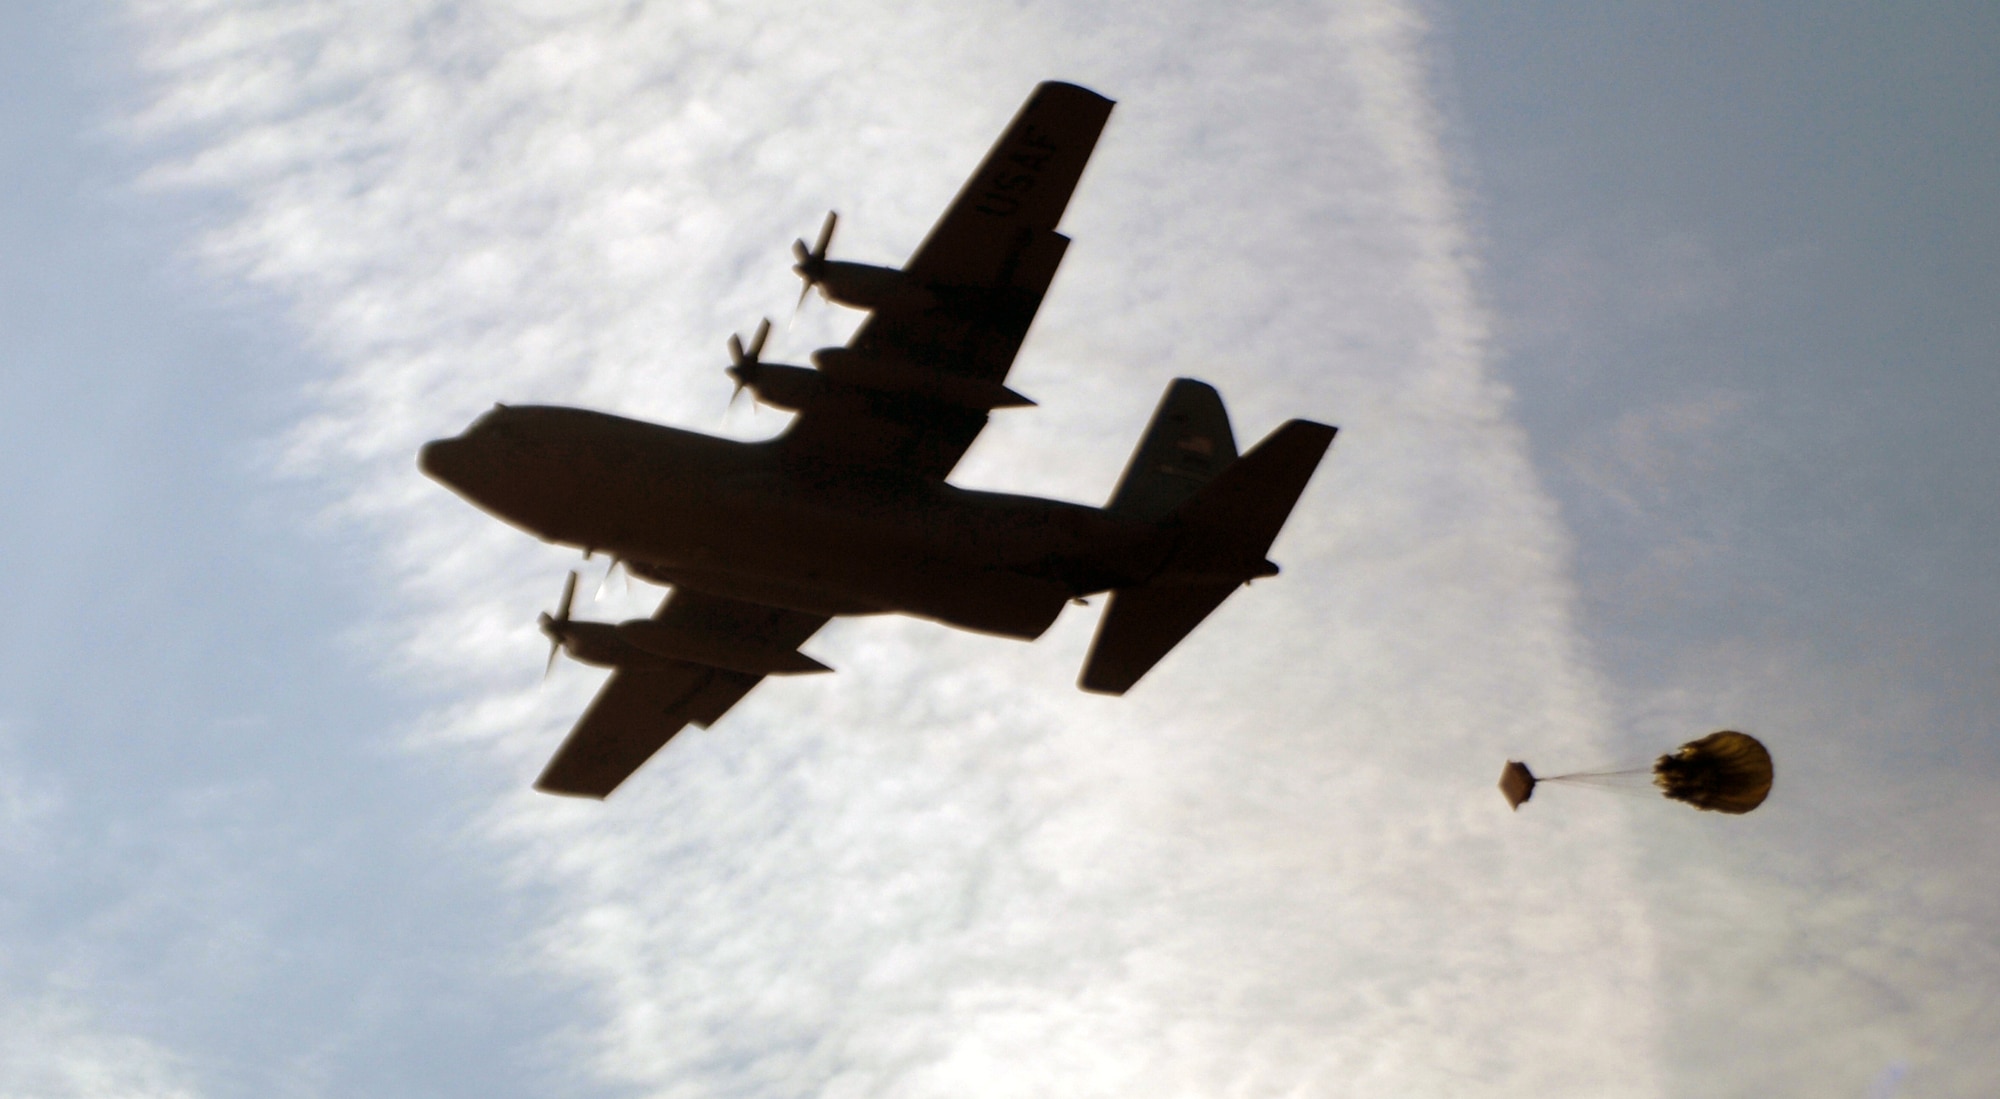 A C-130 Hercules airdrops cargo to ground troops in support of their mission over Afghanistan. C-130’s transport cargo, personnel and airdrop to forward operating bases in the area of responsibility. 

